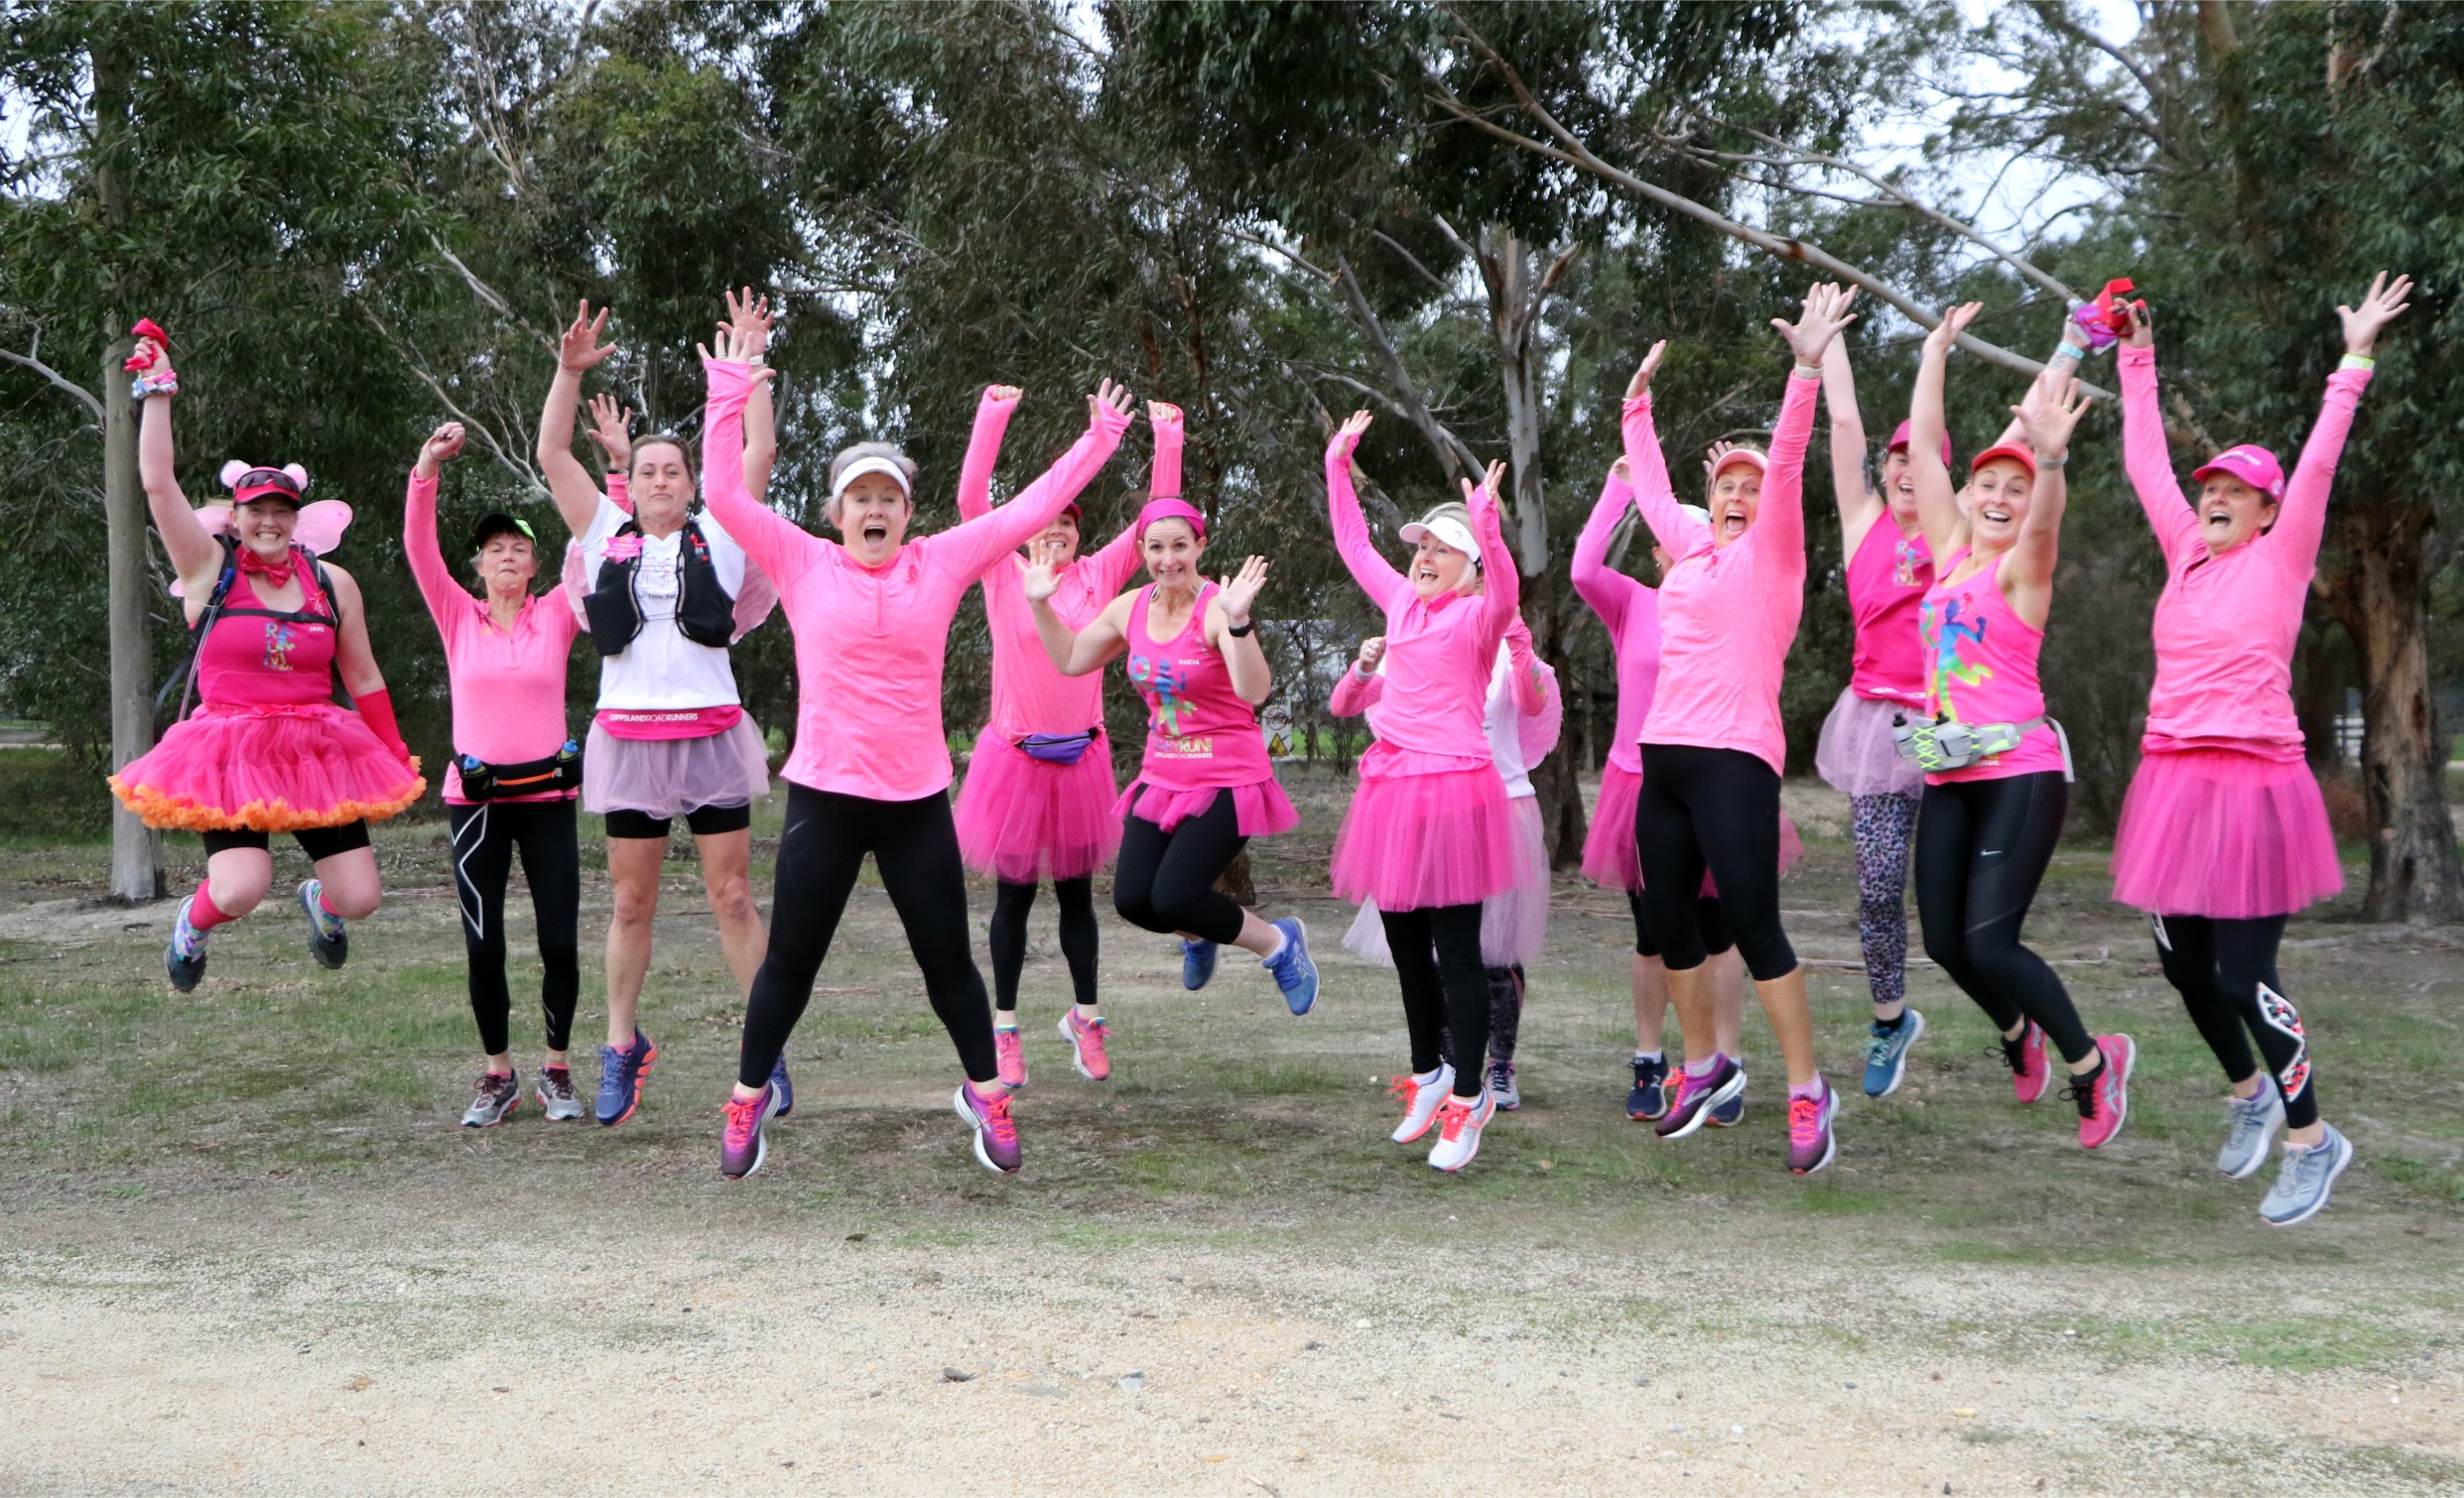 Gippsland Road Runners in Pink jump for joy at Mother's Day Classic Traralgon/ Toongabbie | Bonacci Agency